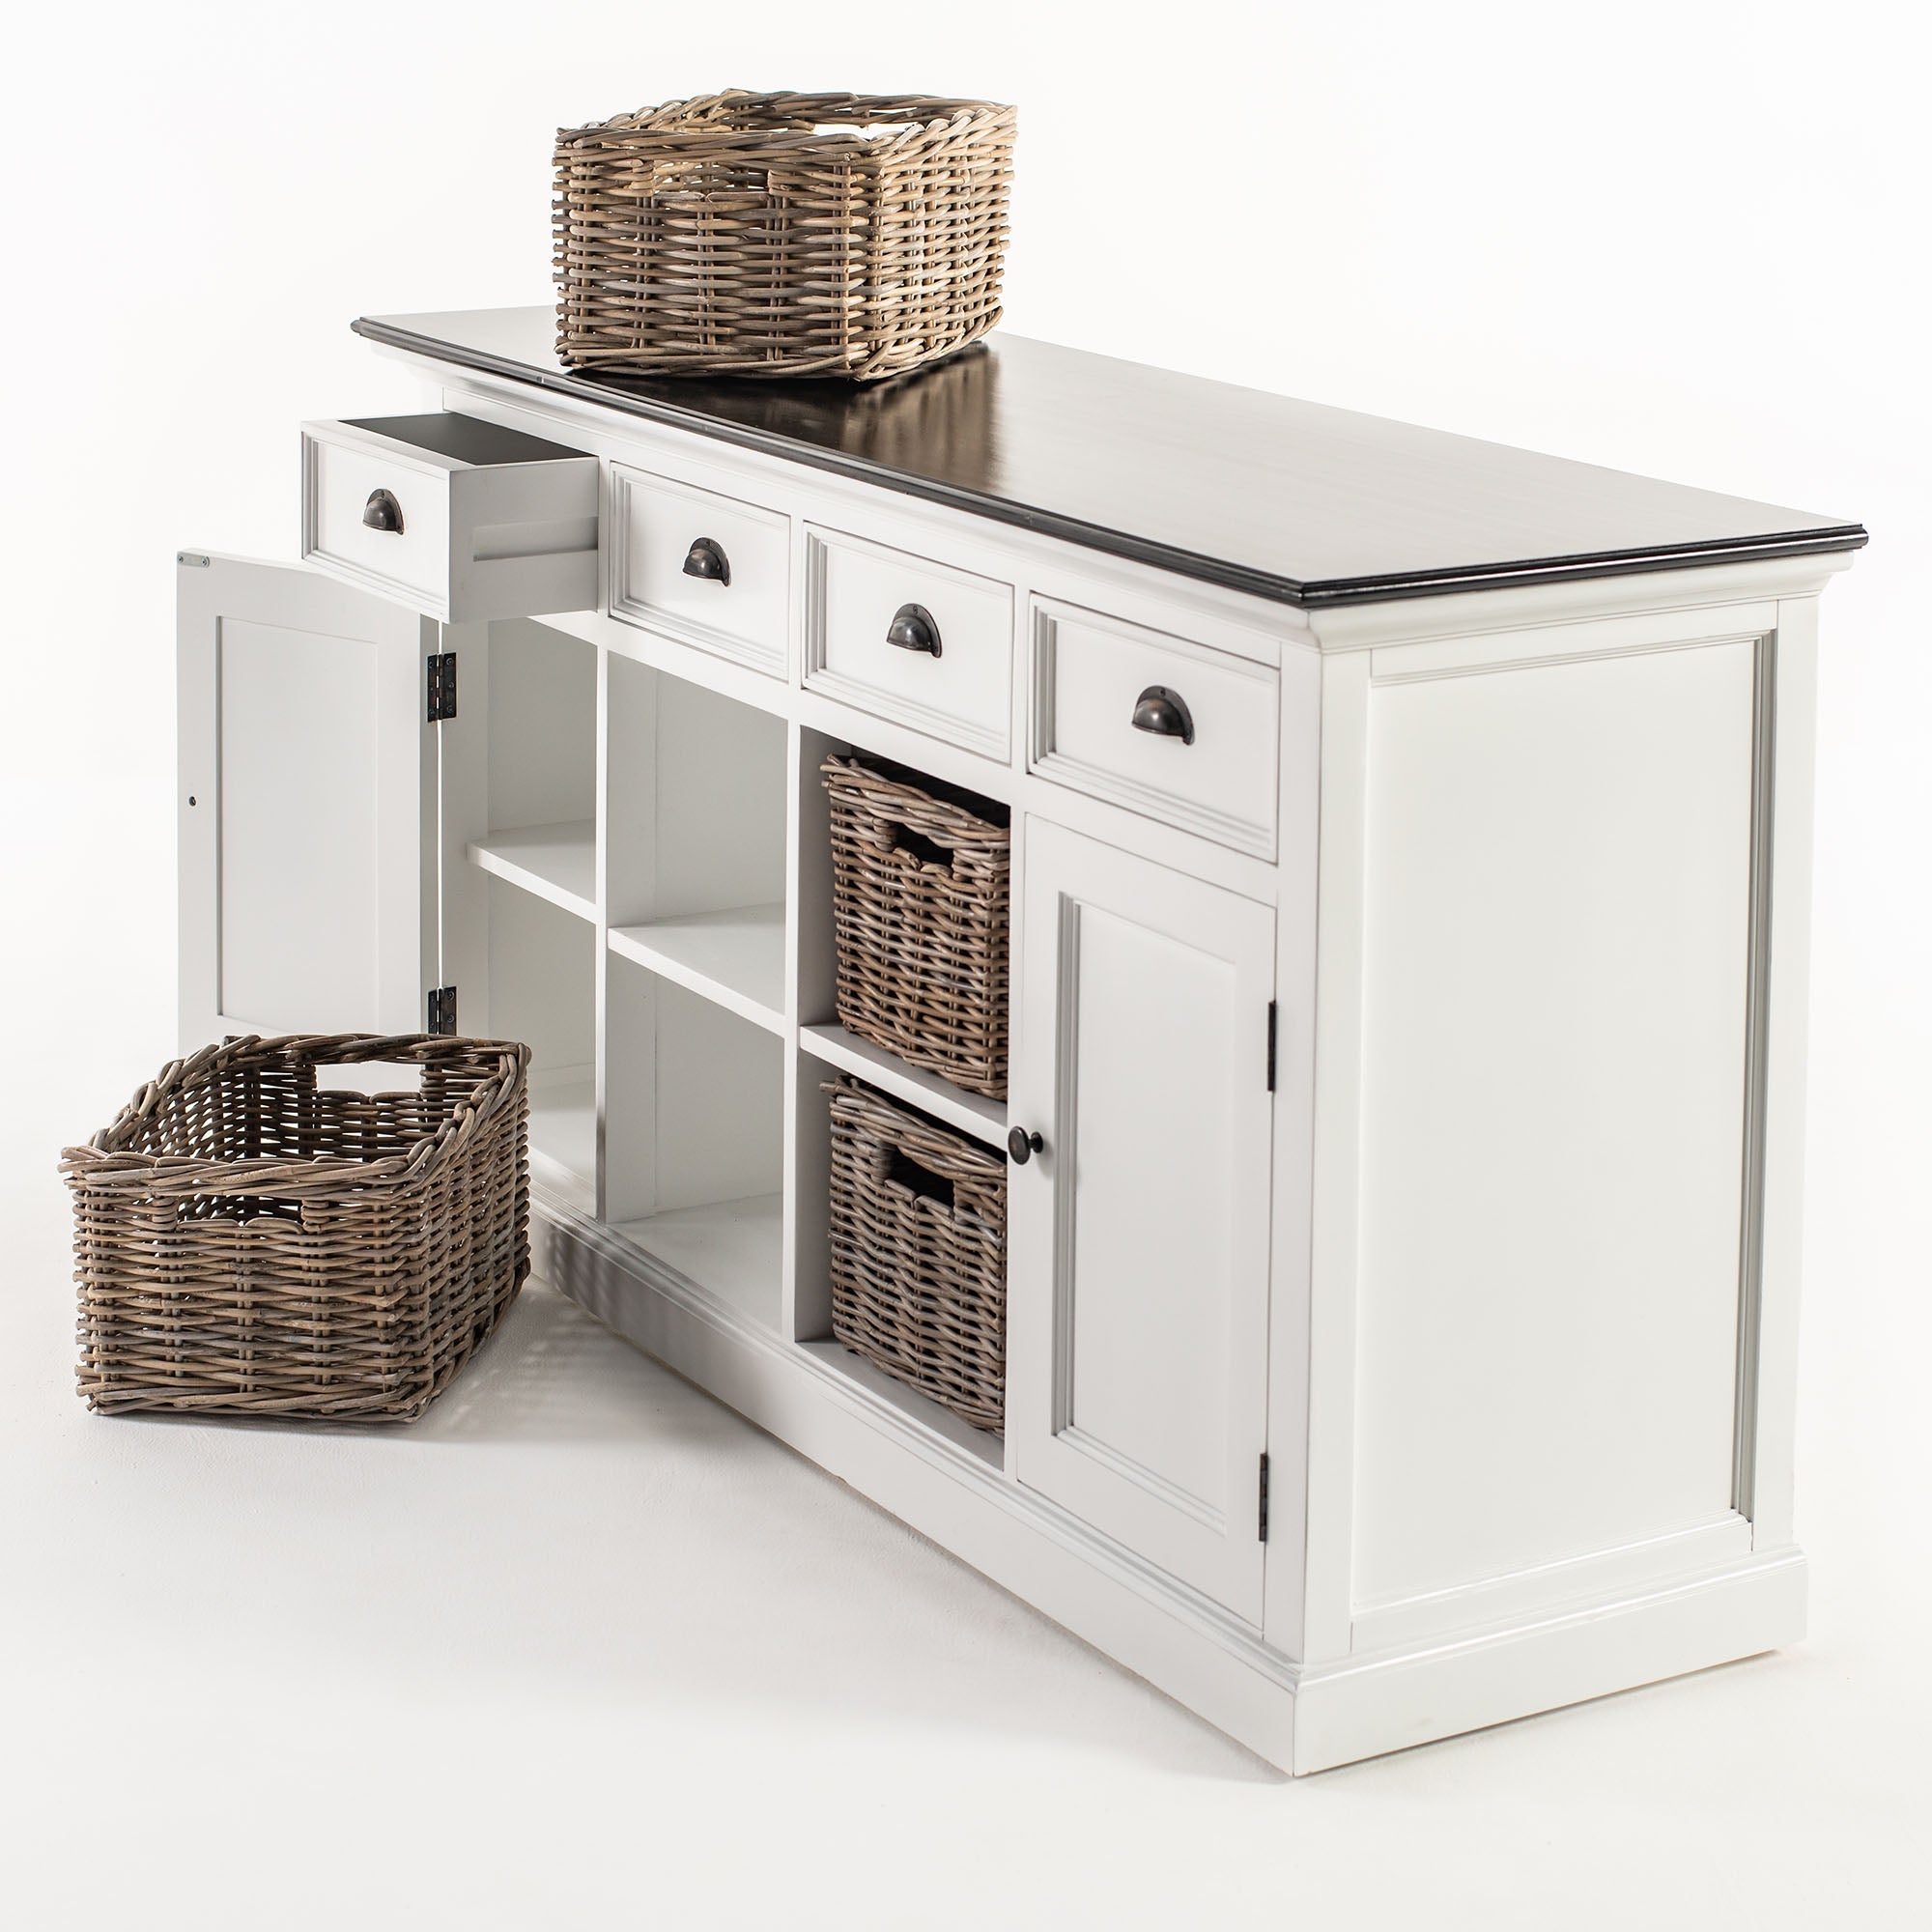 Halifax Contrast Farmhouse White & Black Buffet with 4 Baskets